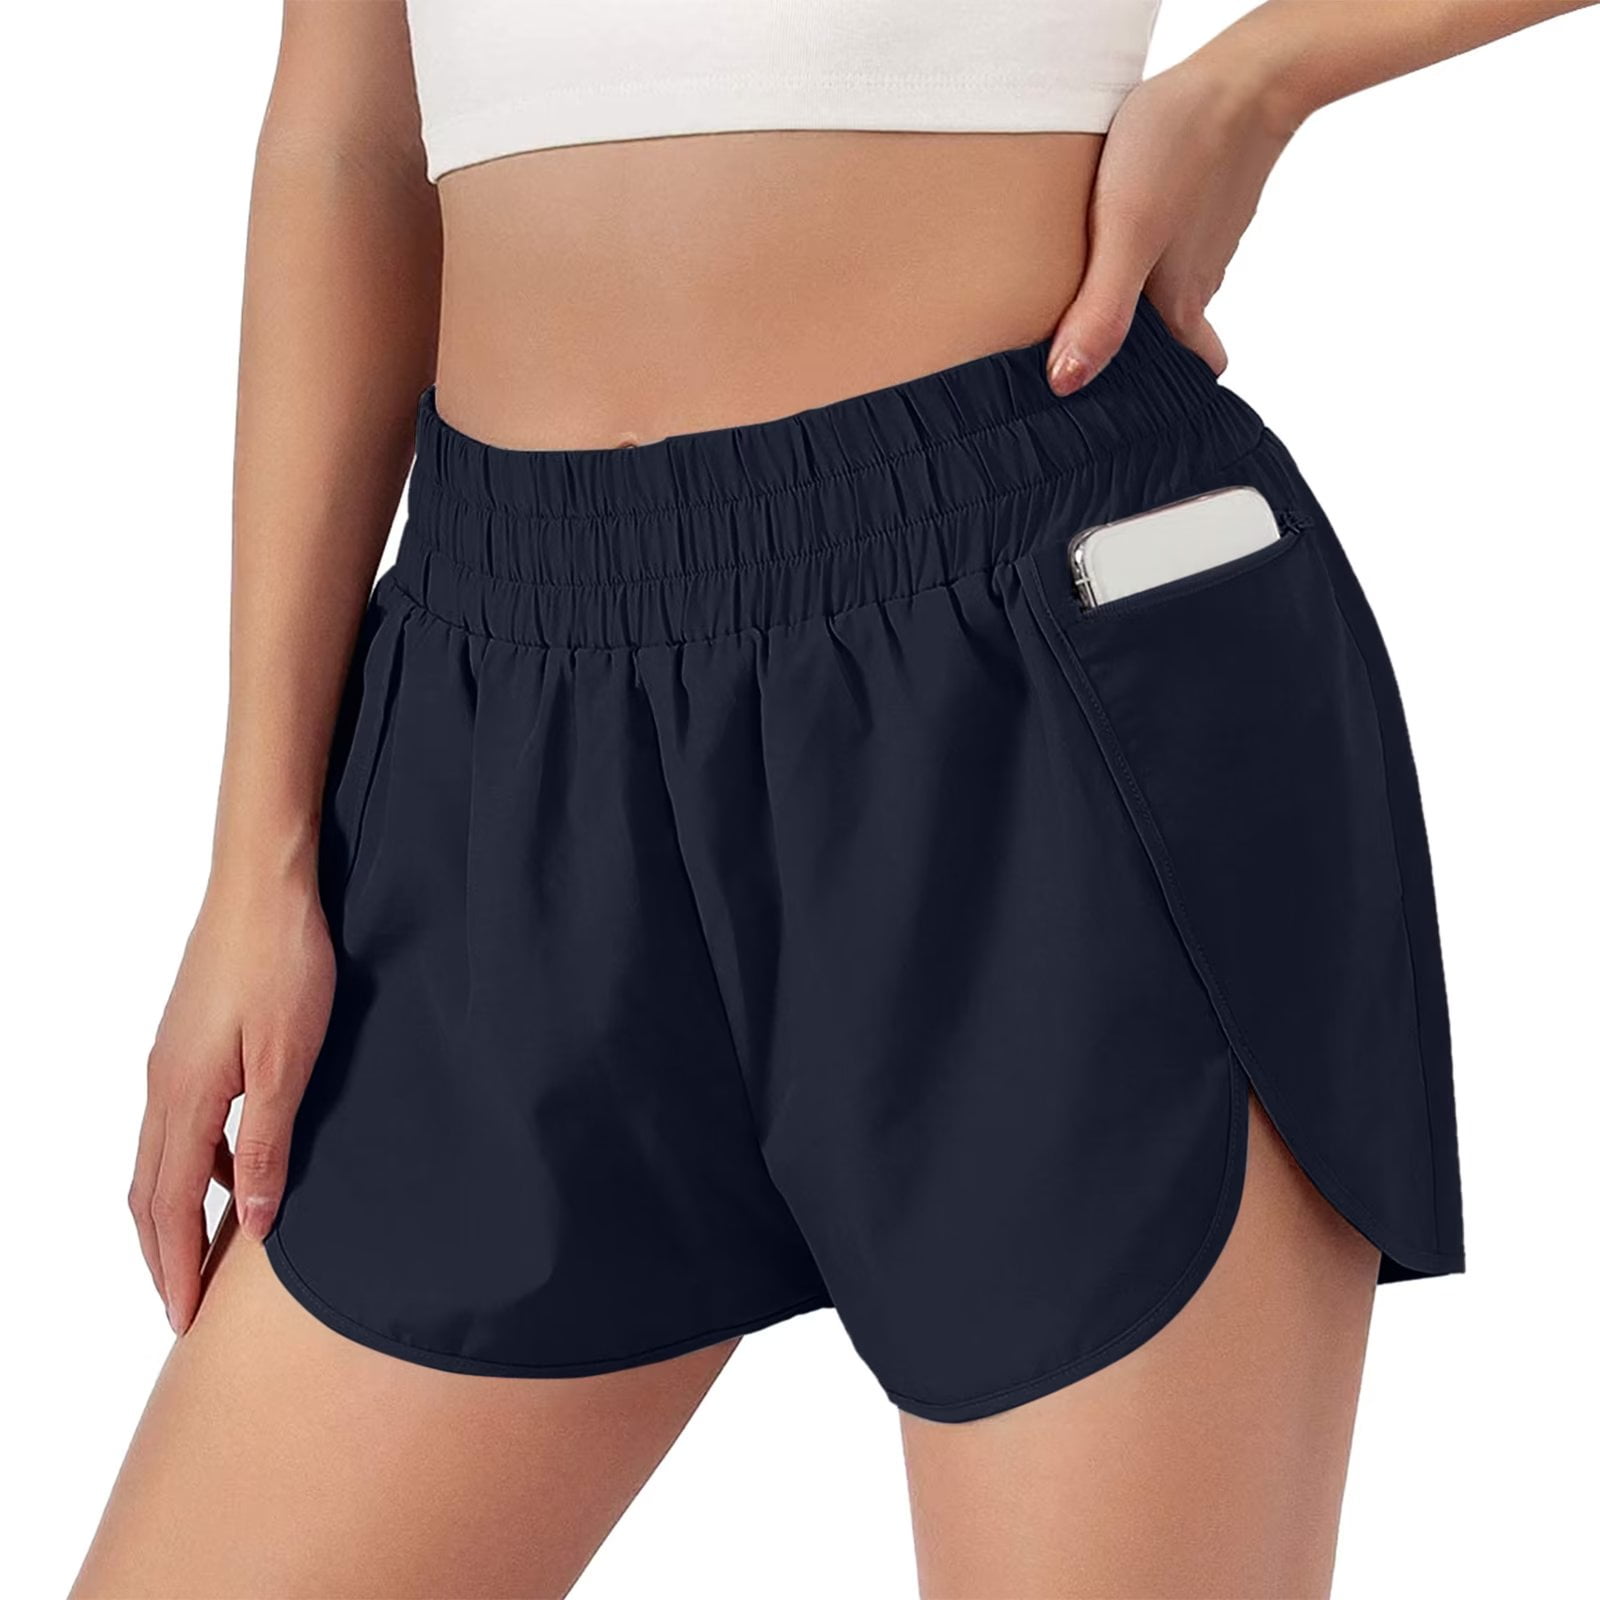 Women's Running Shorts Elastic High Waisted Athletic Workout